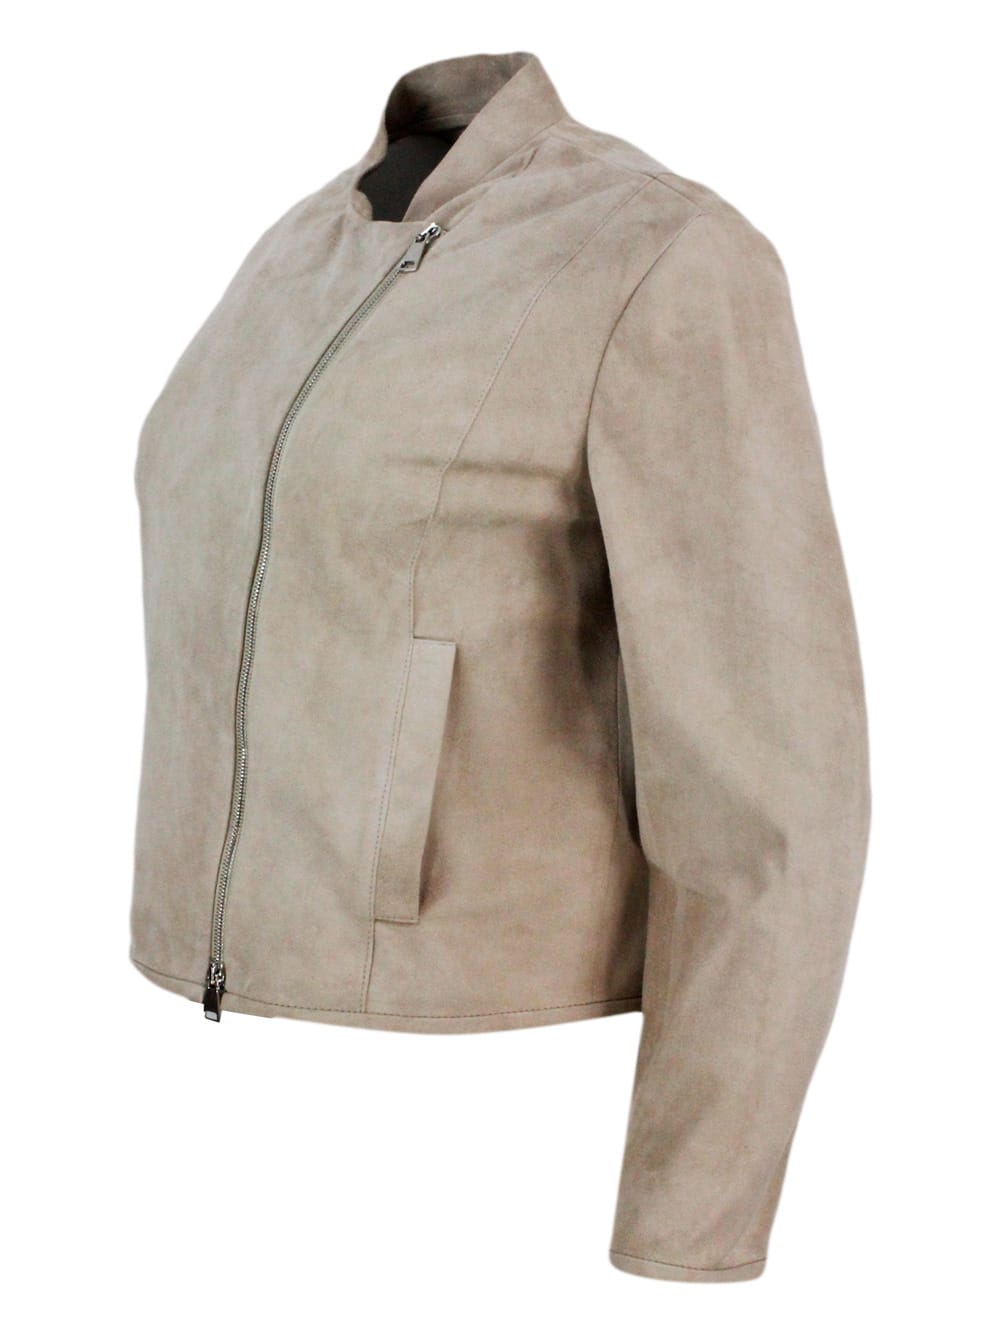 Shop Antonelli Biker Jacket Made Of Soft Suede. Side Zip Closure And Pockets On The Front In Beige